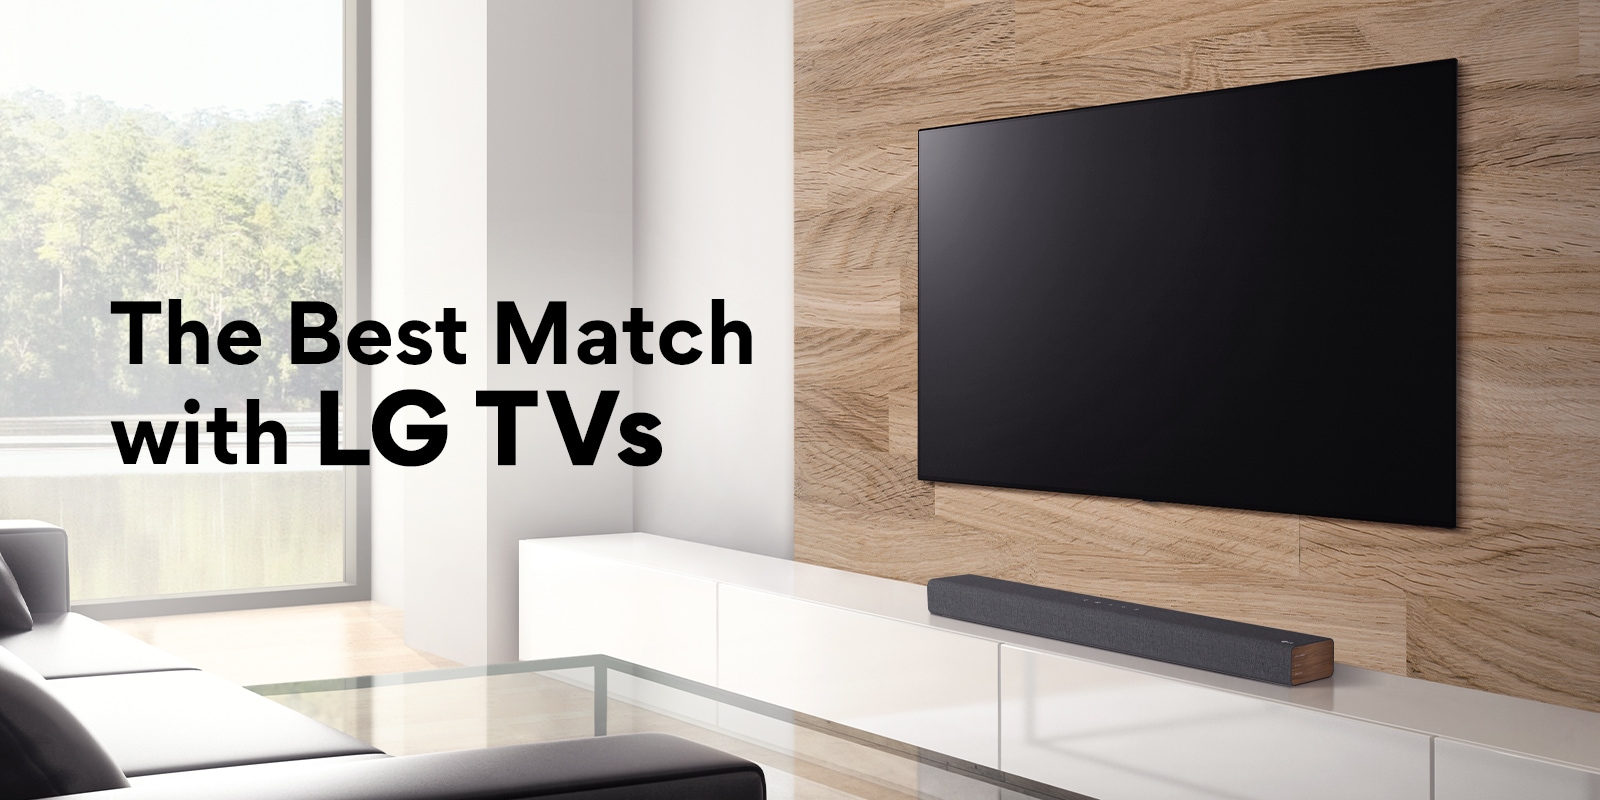 A soundbar is placed on a white TV cabinet and TV is placed on a wooden wall. There is a forest view outisde the window. Text is written on image - The Best Match with LG TVs. 